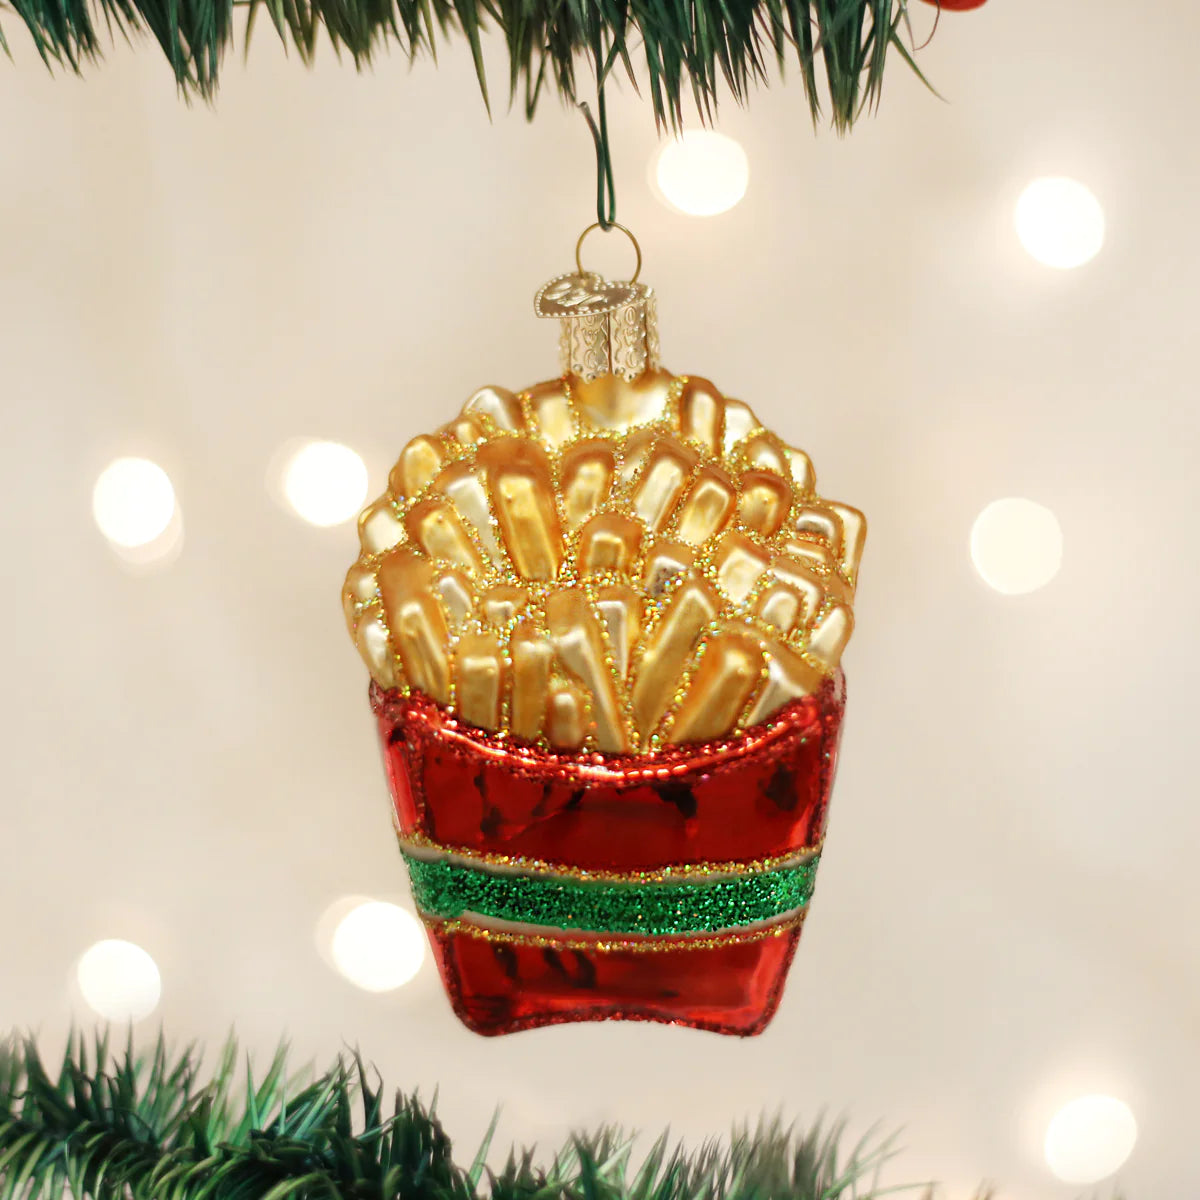 French Fries Ornament  Old World Christmas   